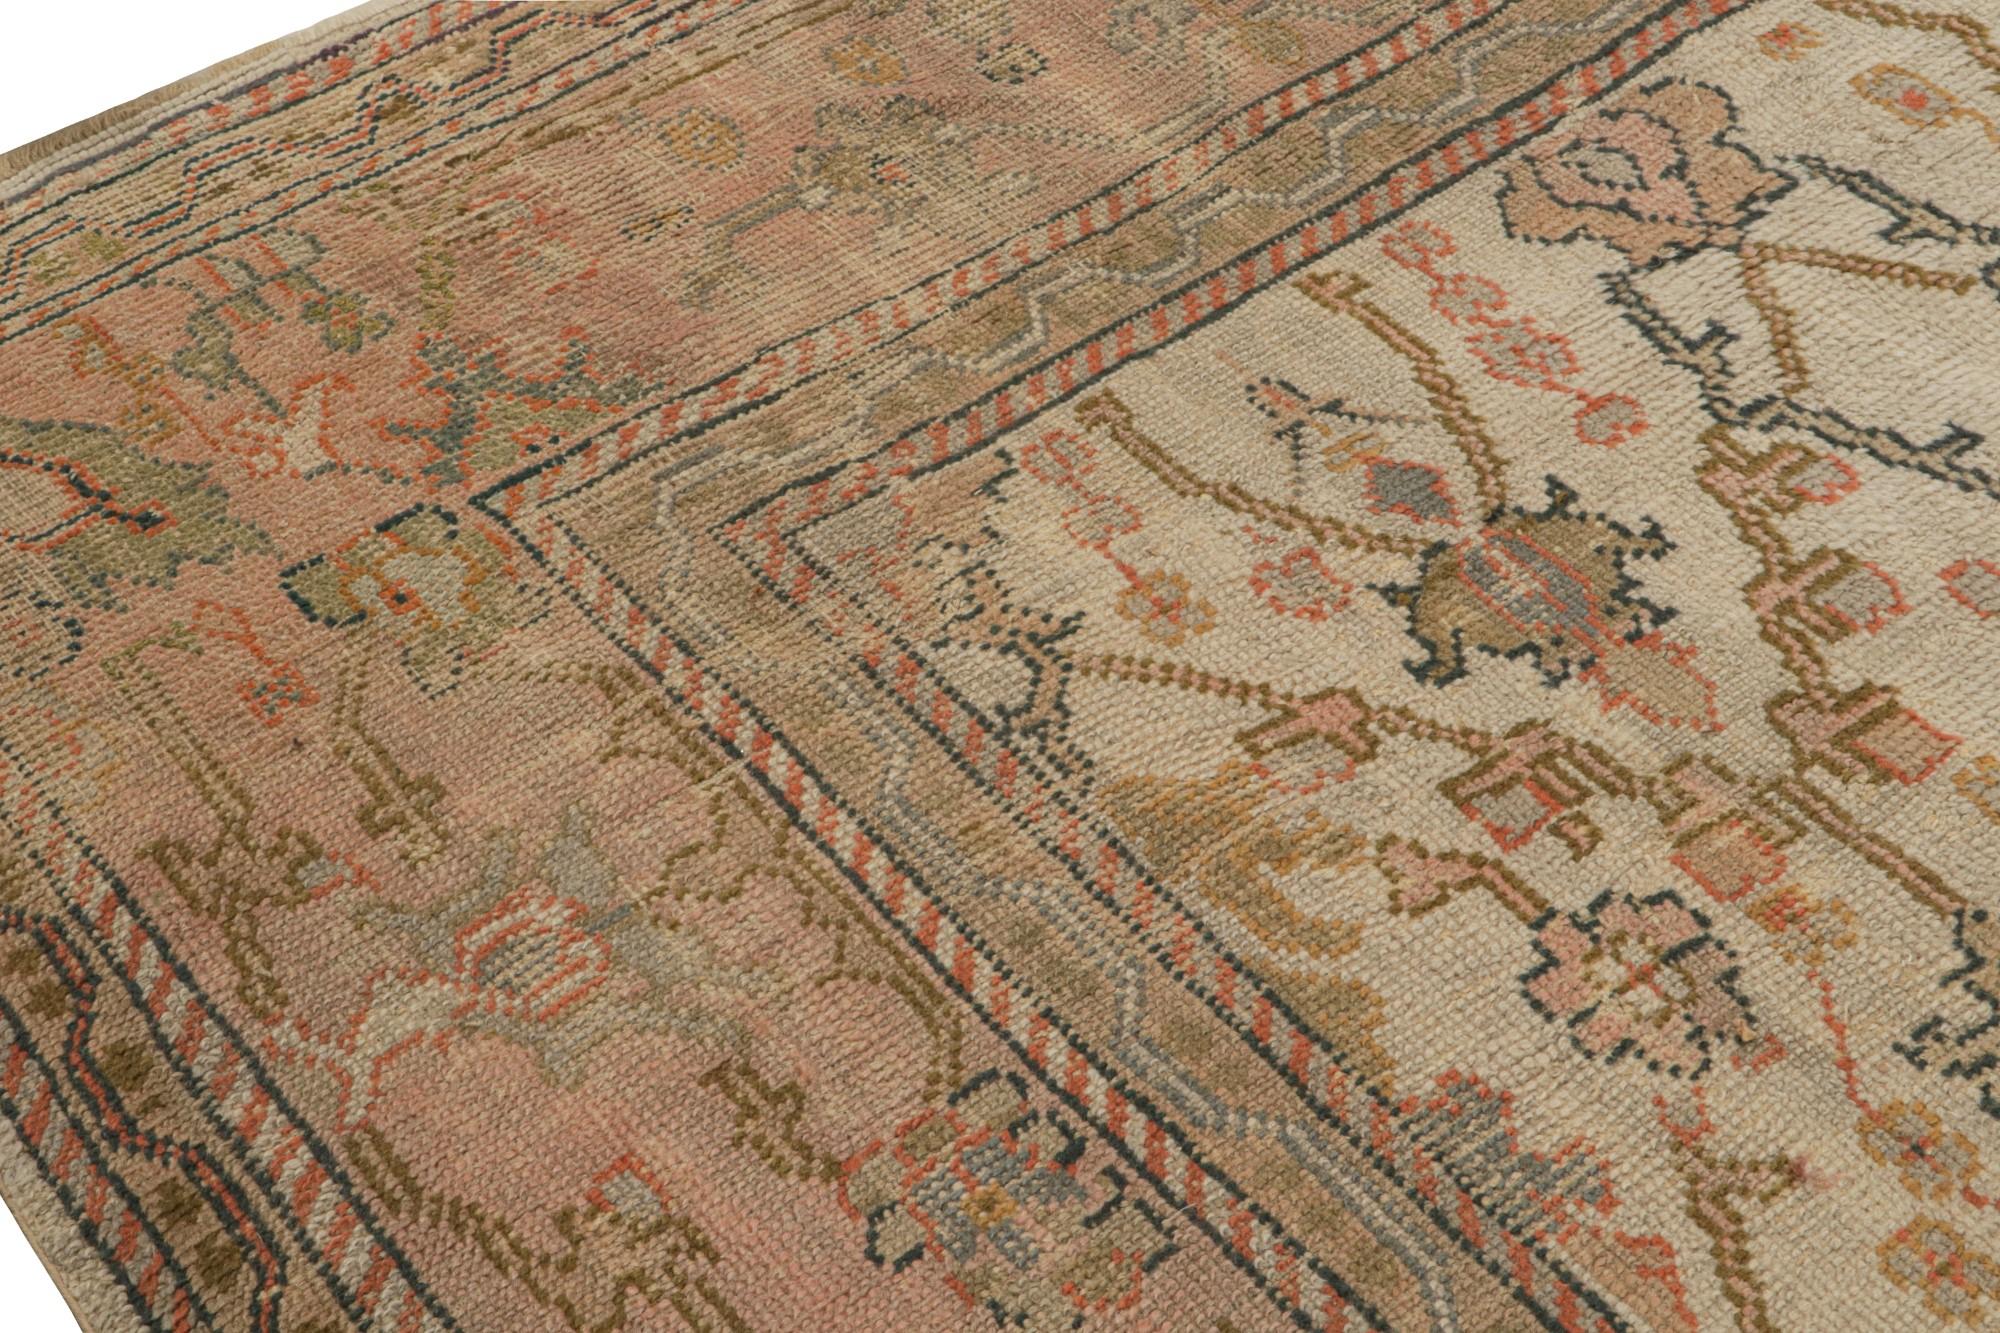 Antique Oushak Rug in Beige and Pink with Floral Patterns, from Rug & Kilim In Good Condition For Sale In Long Island City, NY